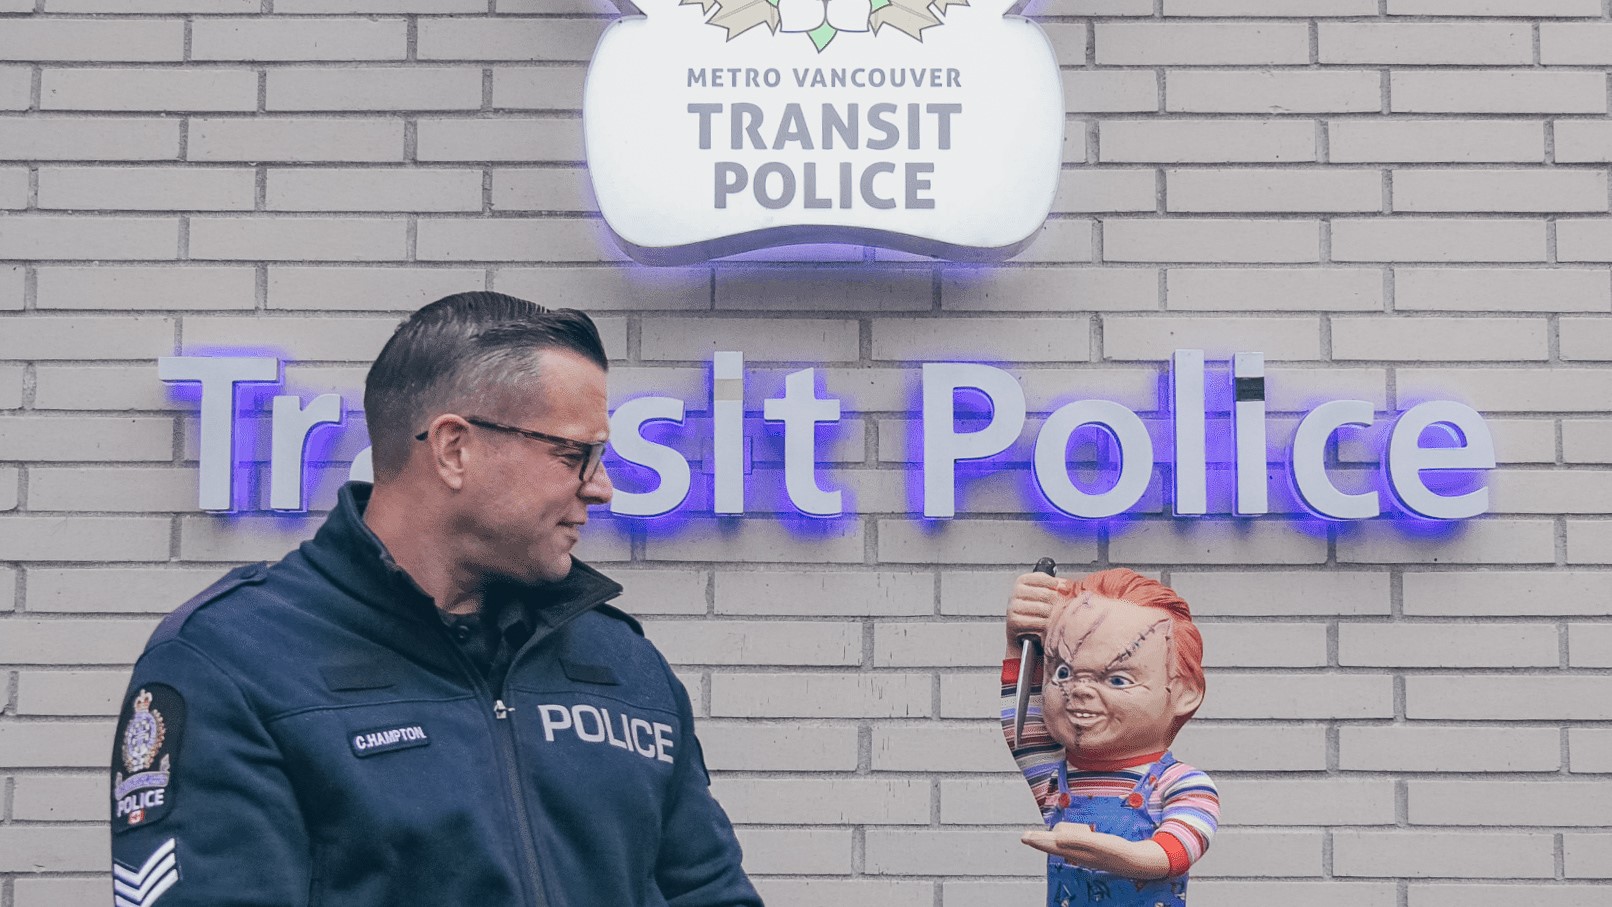 5 tips for a safe and spooktacular Halloween on transit from Transit Police